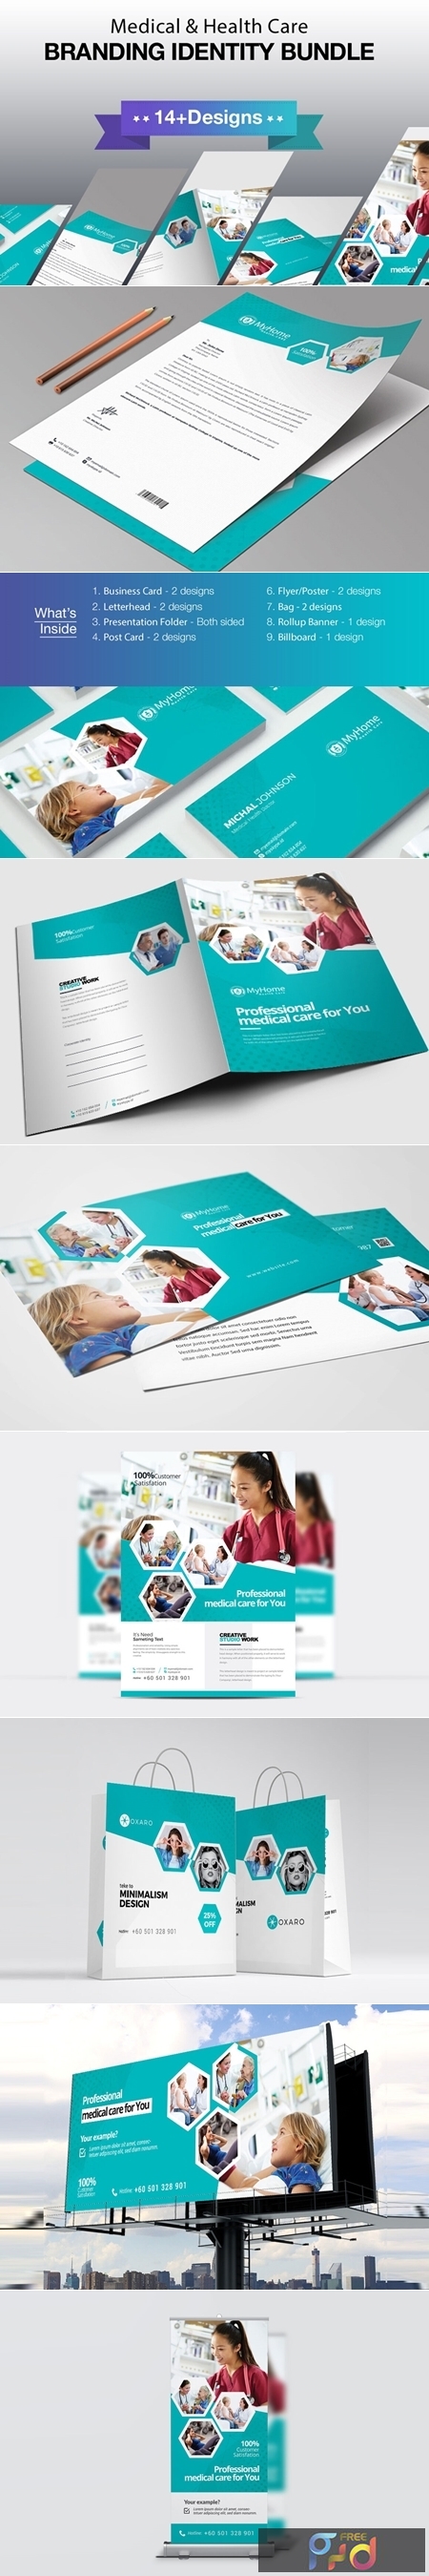 Medical And Health Care Branding Identity 3602126 1